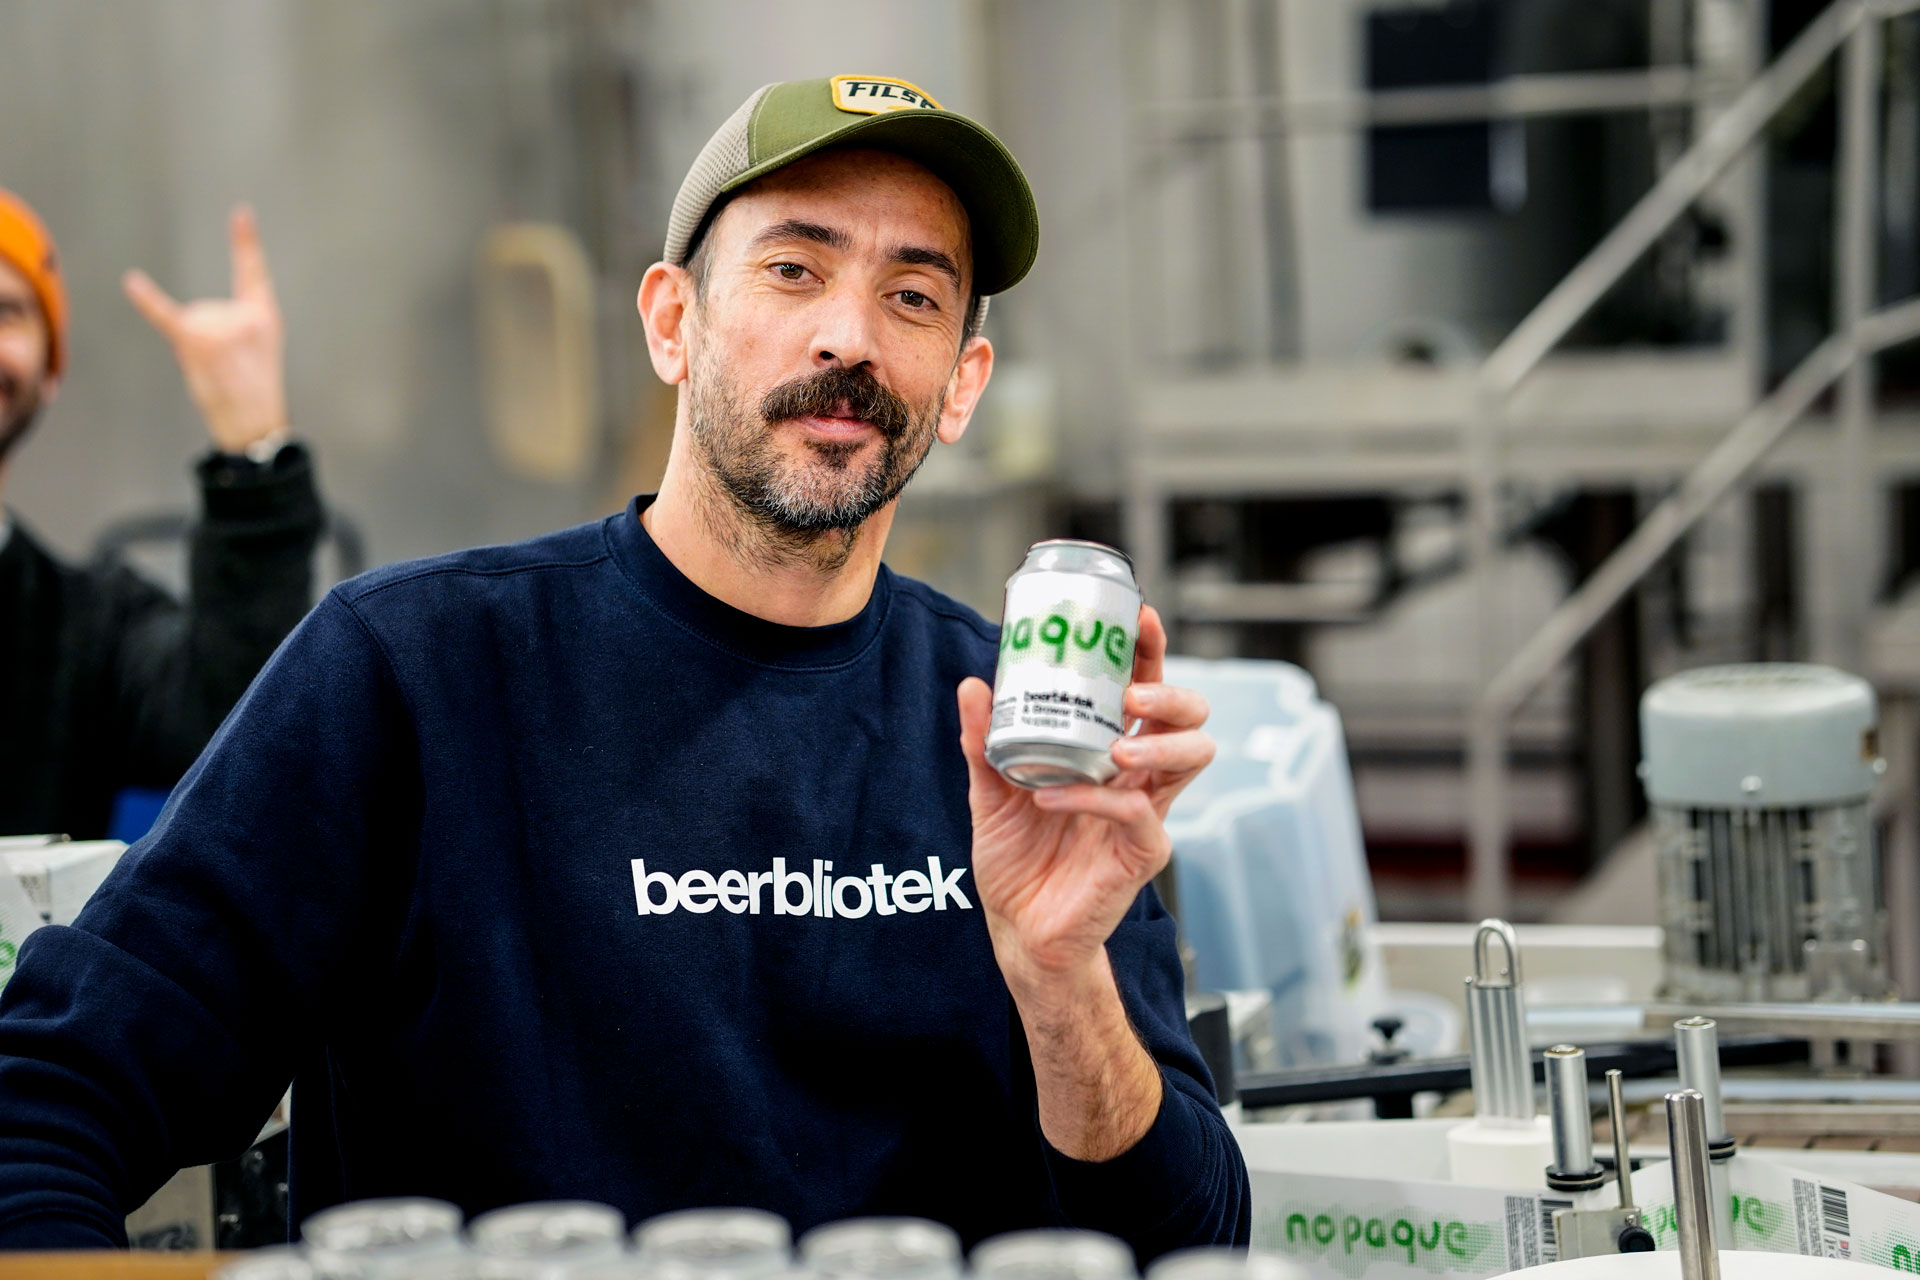 Beerbliotek, a Swedish Craft Brewery based in Gothenburg, Sweden, brewed a West Coast IPA called “Nopaque” with Browar Stu Mostów (The Brewery of a Hundred Bridges) is a craft brewery from Wrocław, Poland. This is a photo of Darryl De Necker holding a can of Nopaque.